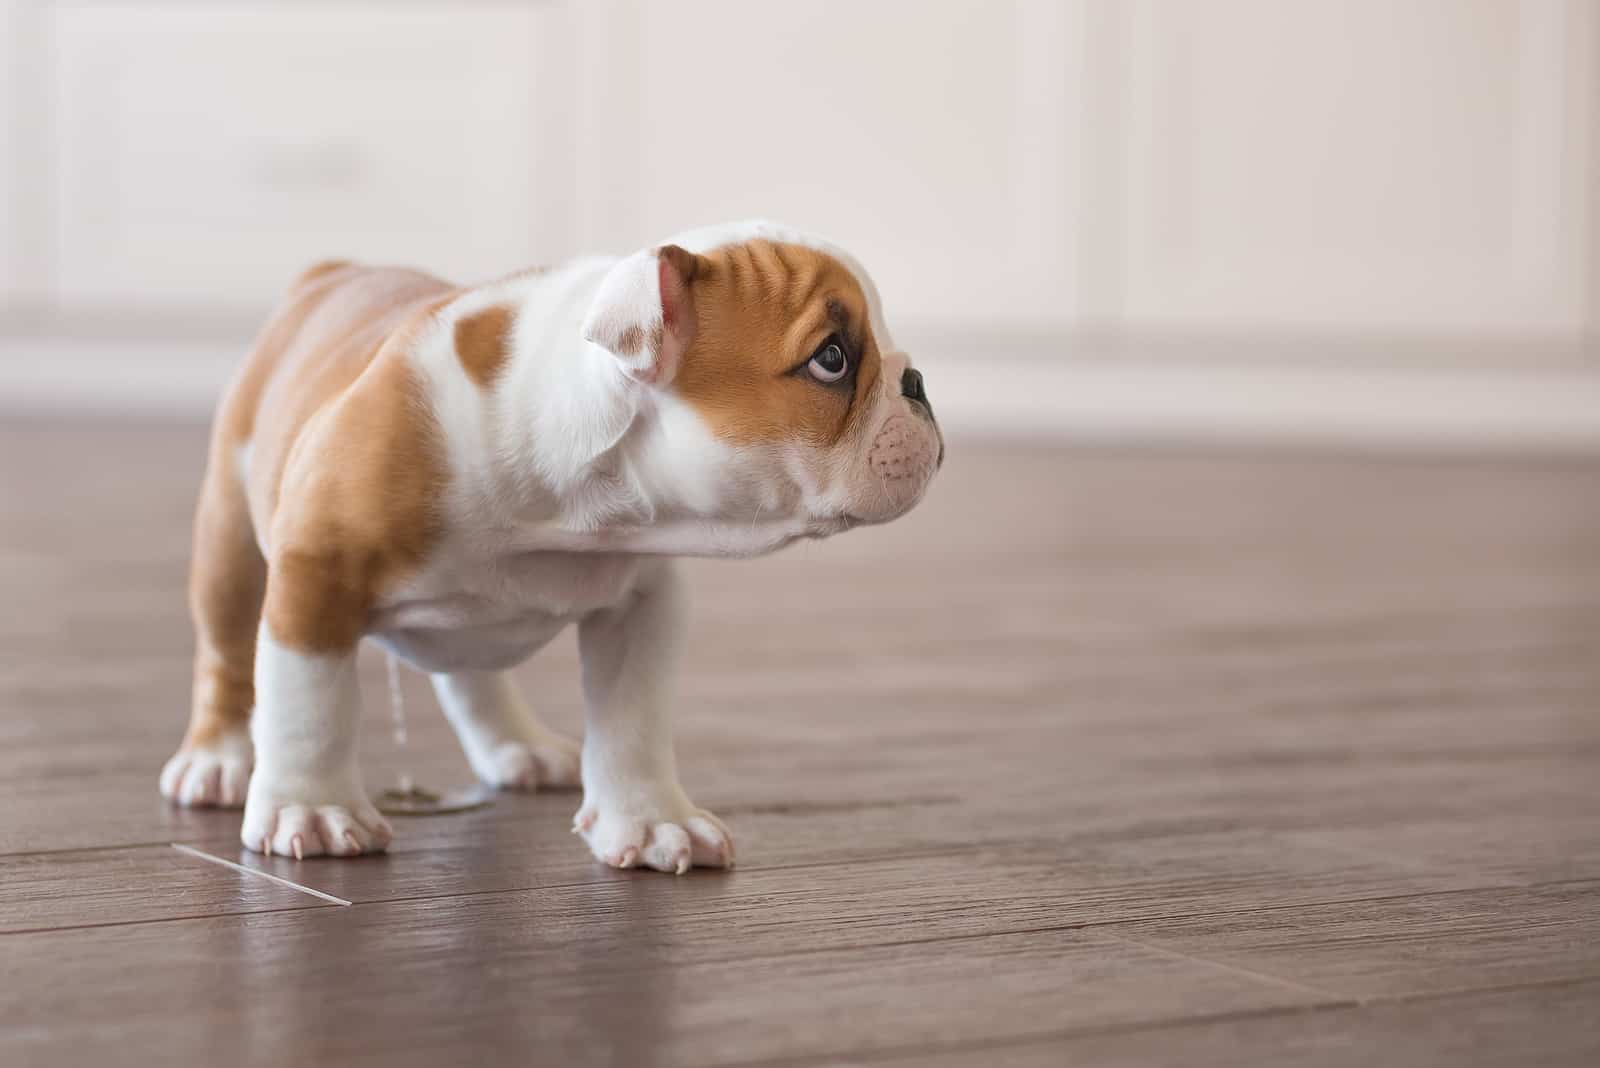 puppy of english bull dog peeing on the floor